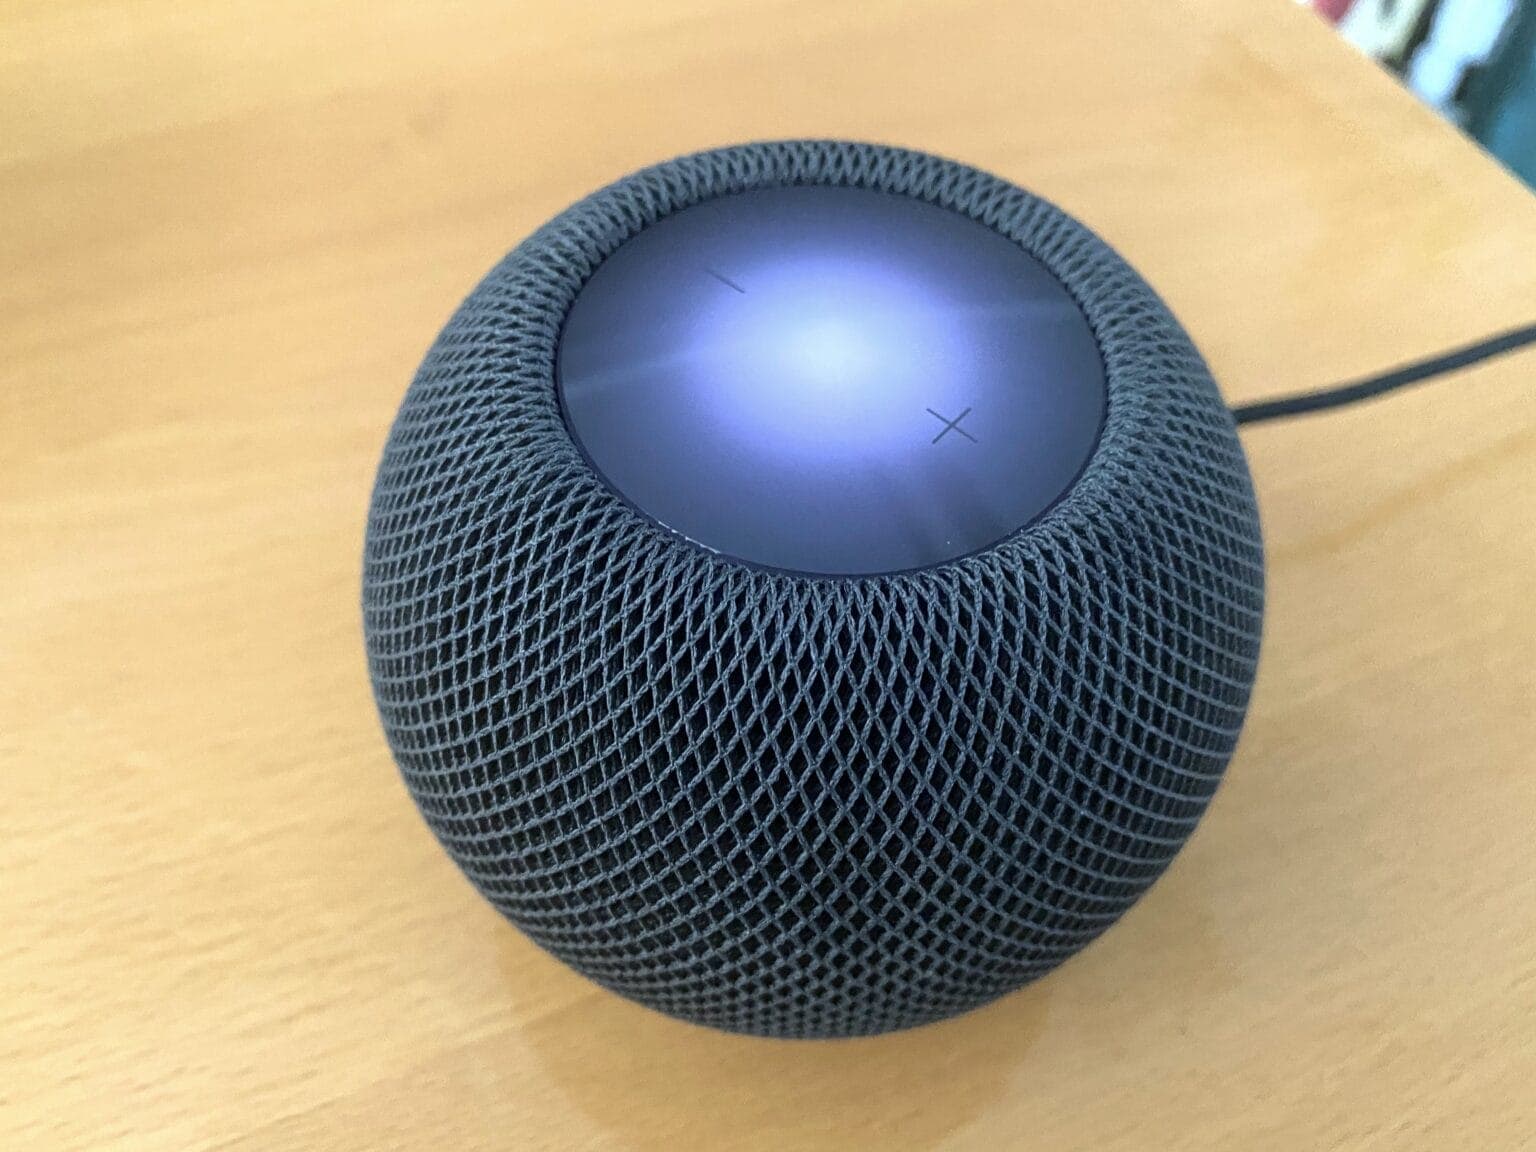 HomePod mini is one of the devices that can be a Thread 1.3.0 border router.